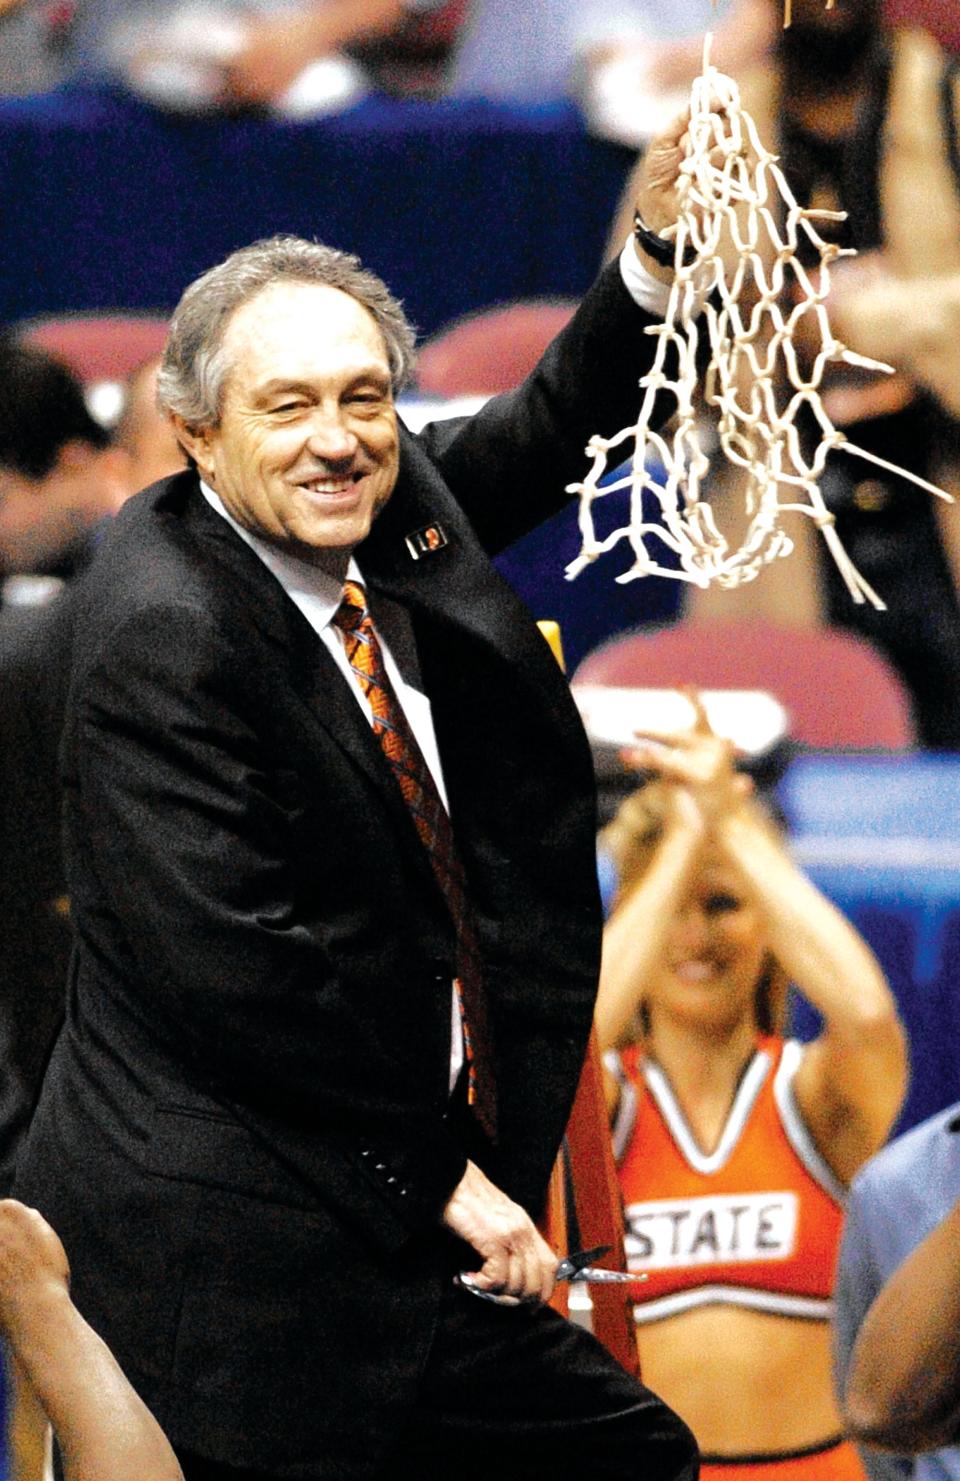 Eddie Sutton finished cutting the net after coaching OSU to the 2004 Final Four with a win over Saint Joseph's in East Rutherford, N.J.